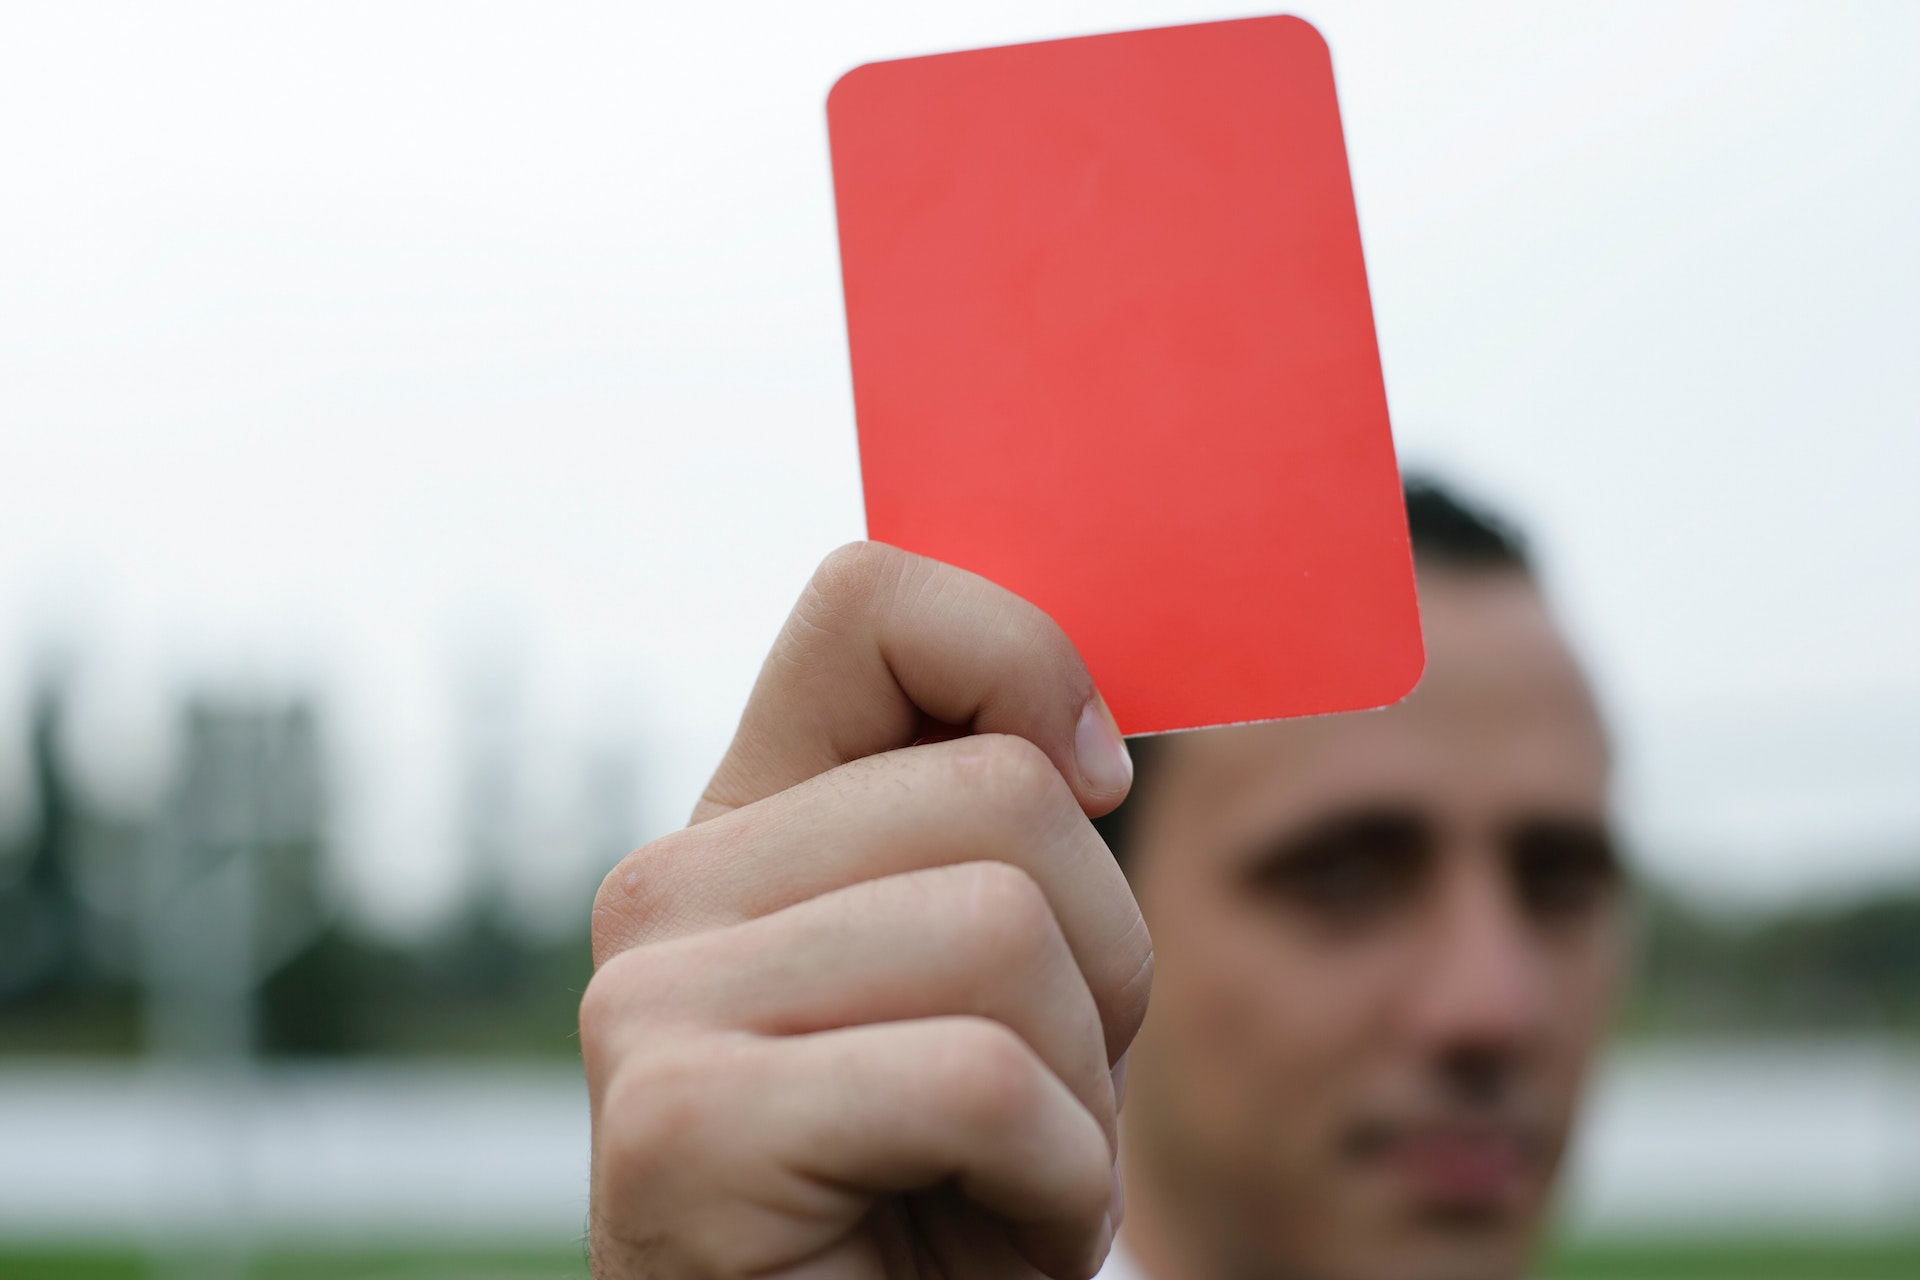 Person Holding Red Card